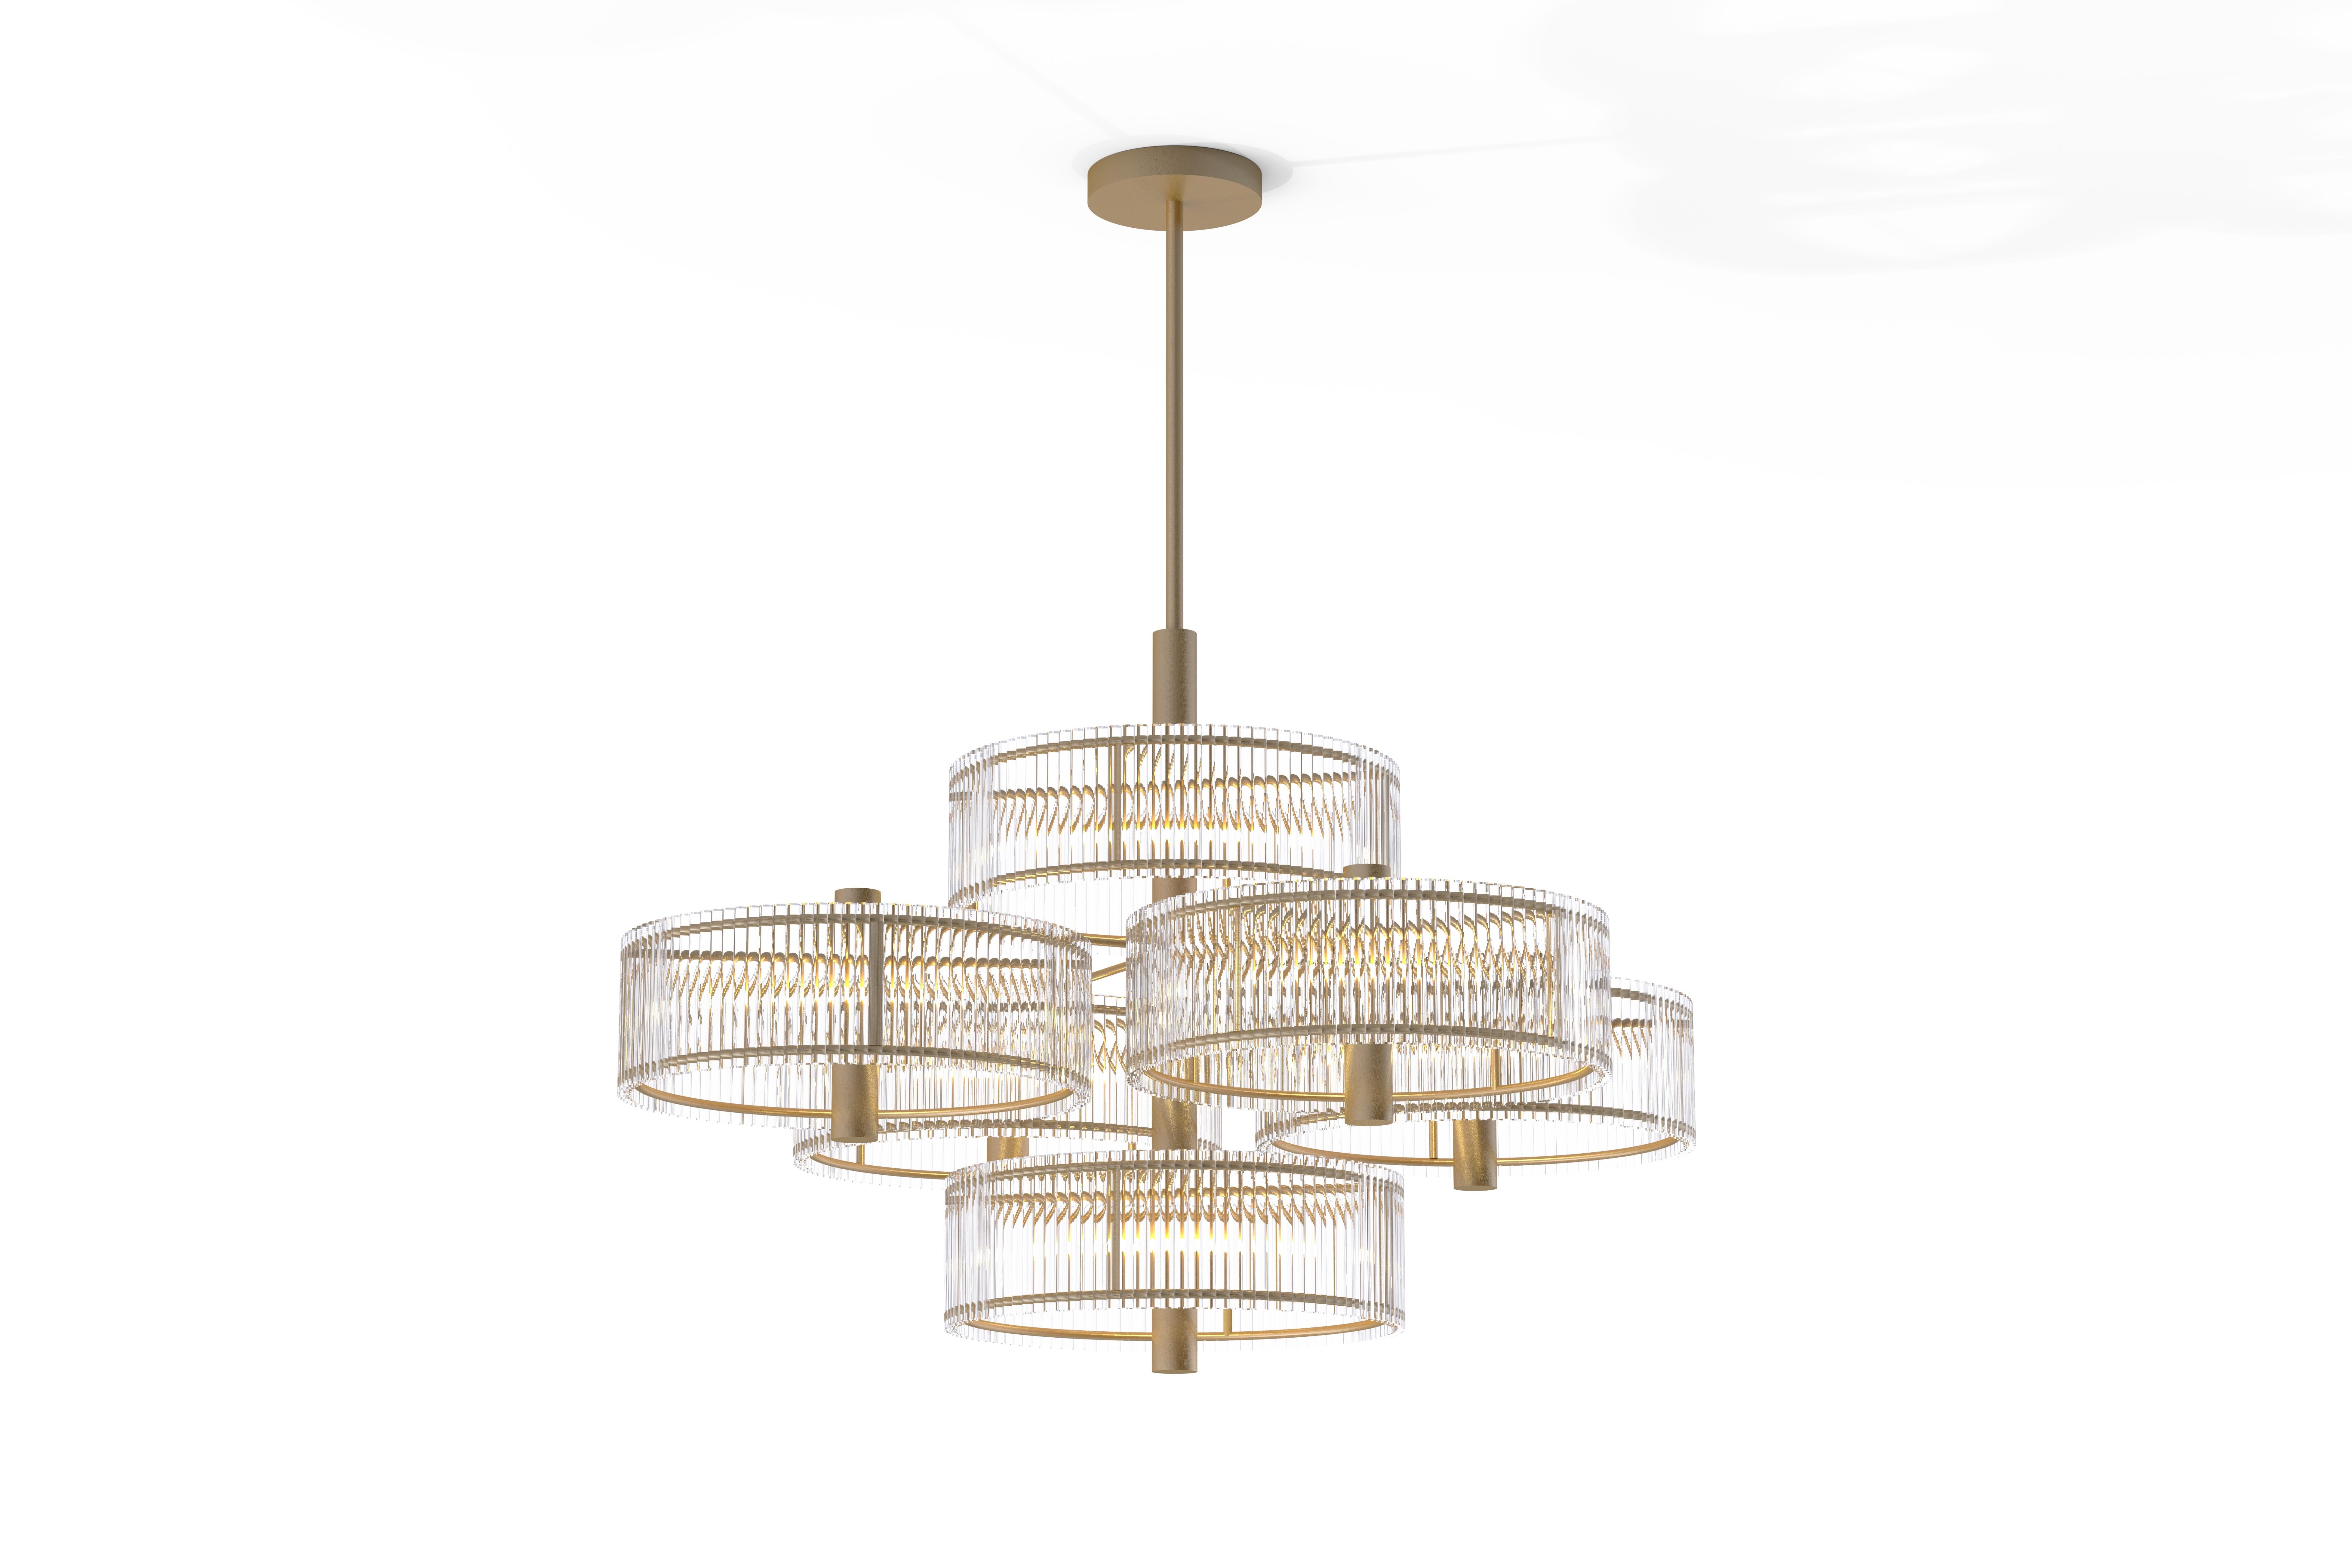 Contemporary Chandelier with six fluted glass shades and brushed brass metalwork.

Width: 820mm
Shade Height: 620mm
Overall Height: 1190mm
Light Source: G9's, bulbs not included.

Made to order to buyer's specification. Variations to dimensions and